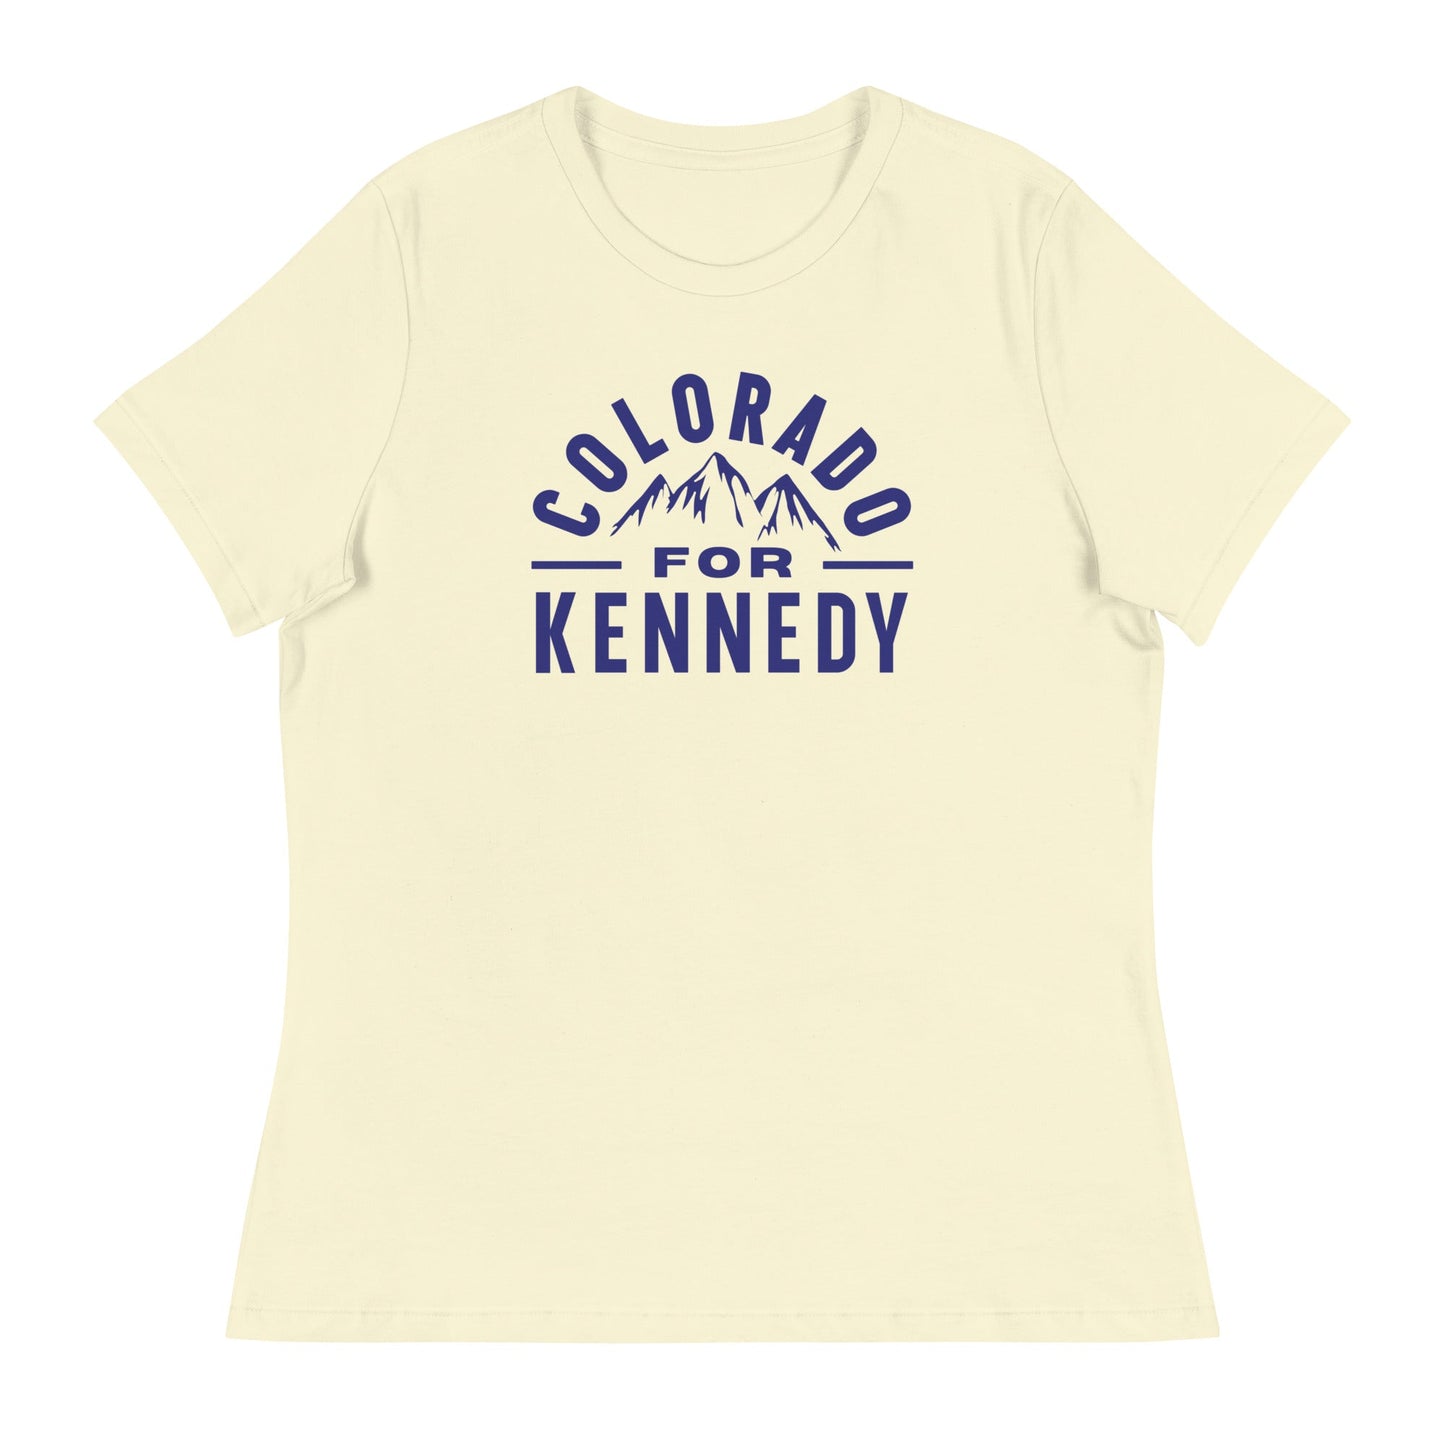 Colorado for Kennedy Women's Relaxed Tee - TEAM KENNEDY. All rights reserved